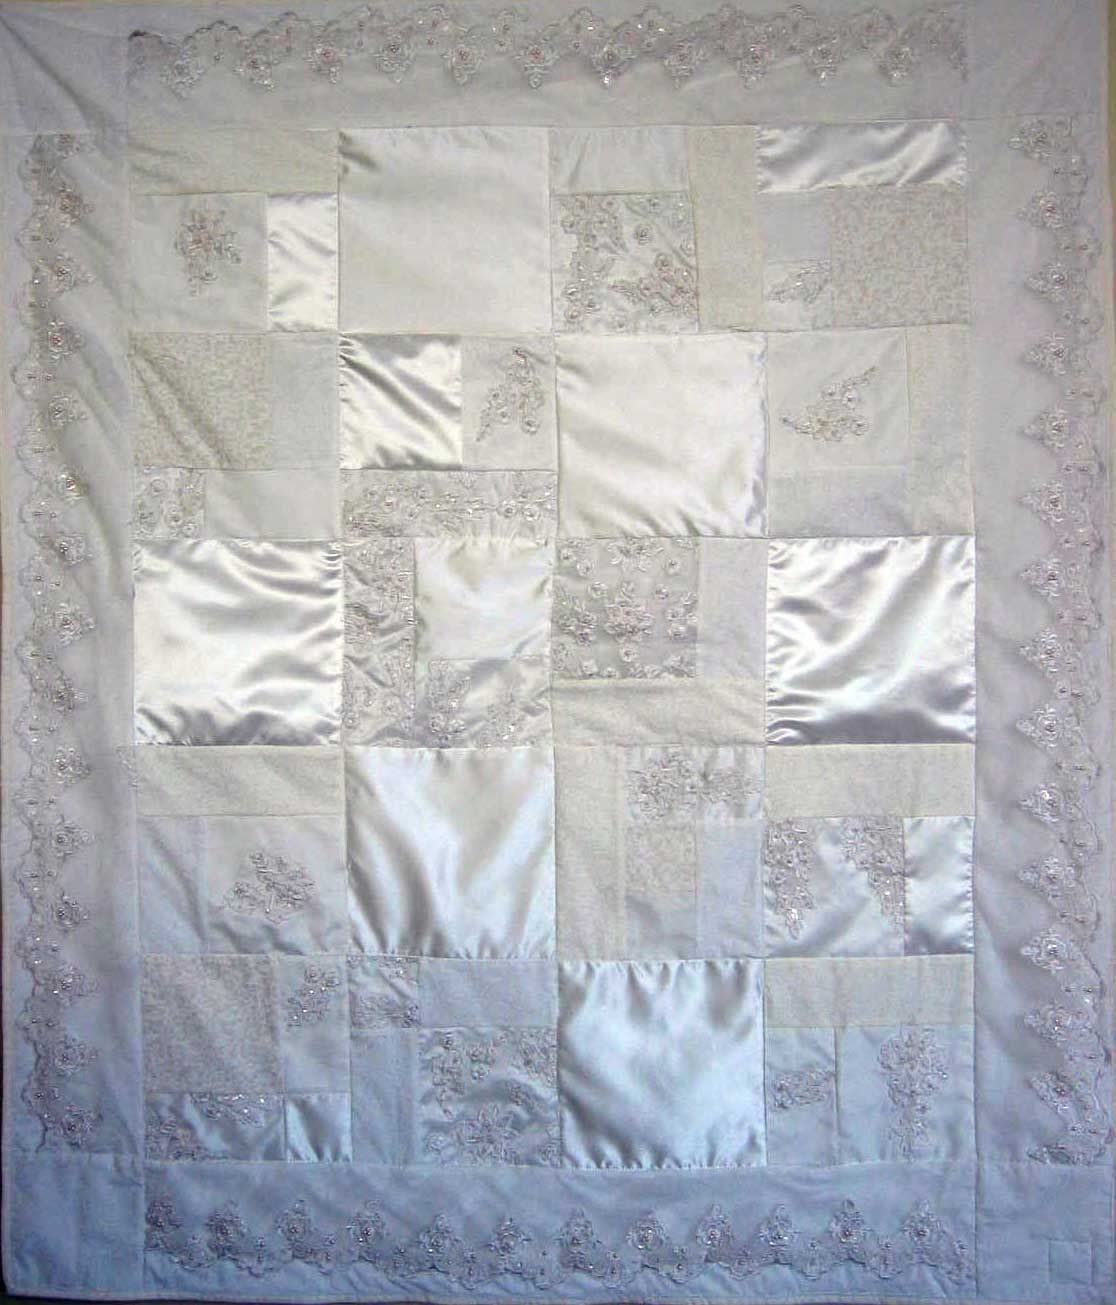 @patchworkbear Turn your wedding dress into a beautiful handmade quilt! Your dress will be pieced with parts of your dress, veil